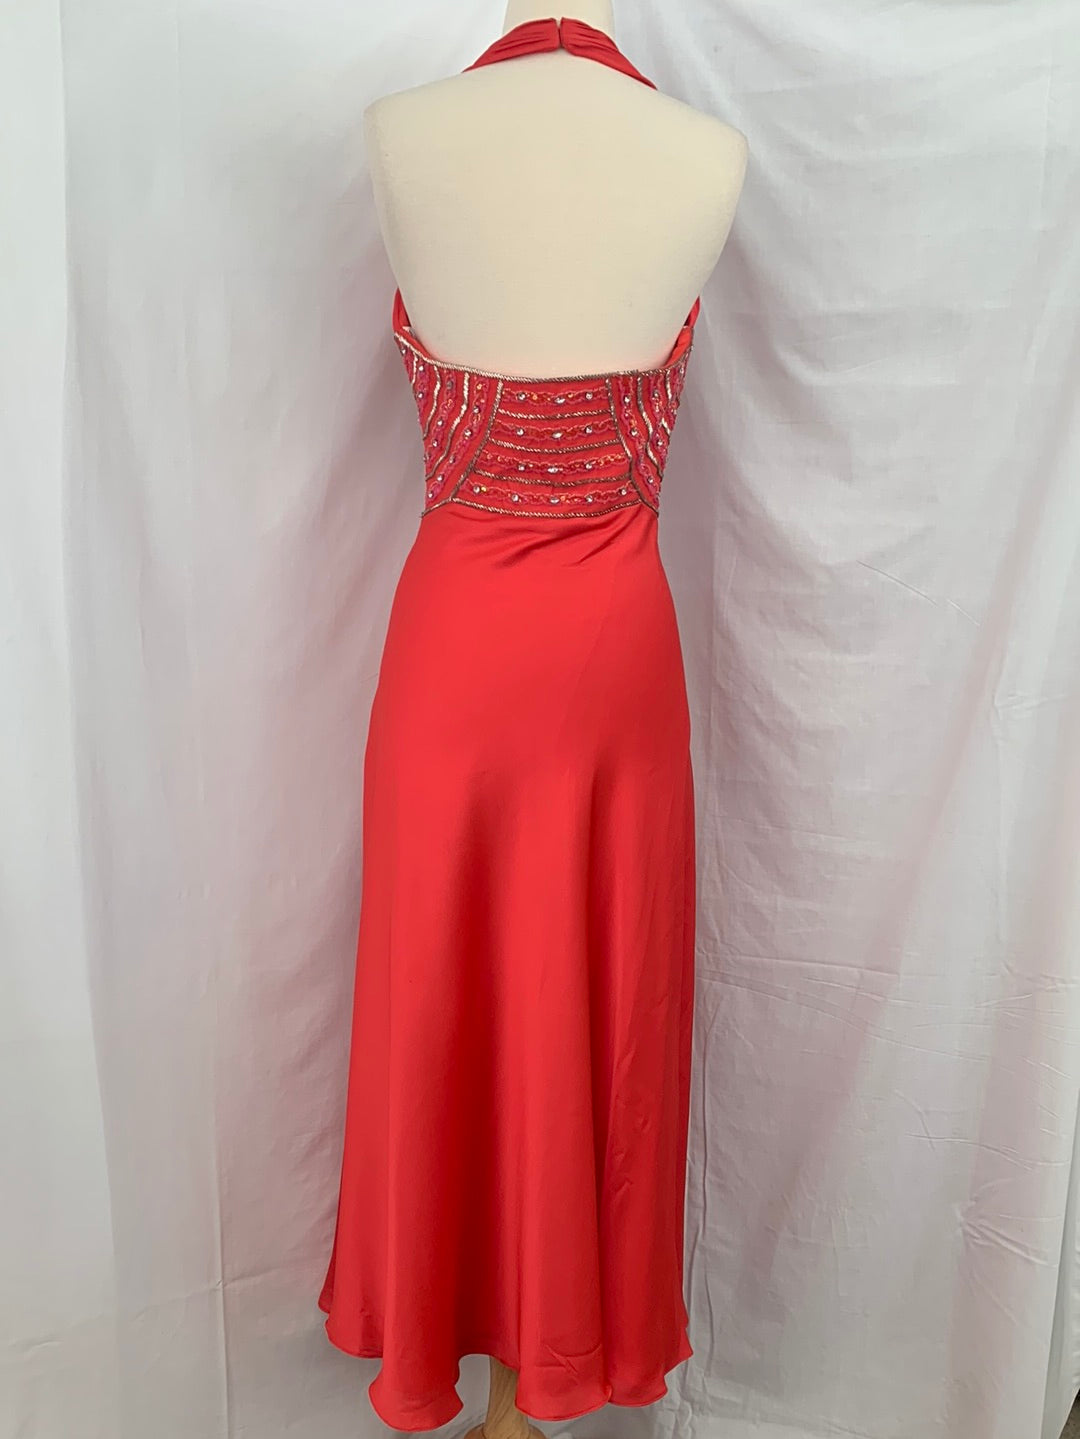 COLI COUTURE coral Formal Beaded Halter Dress - 6